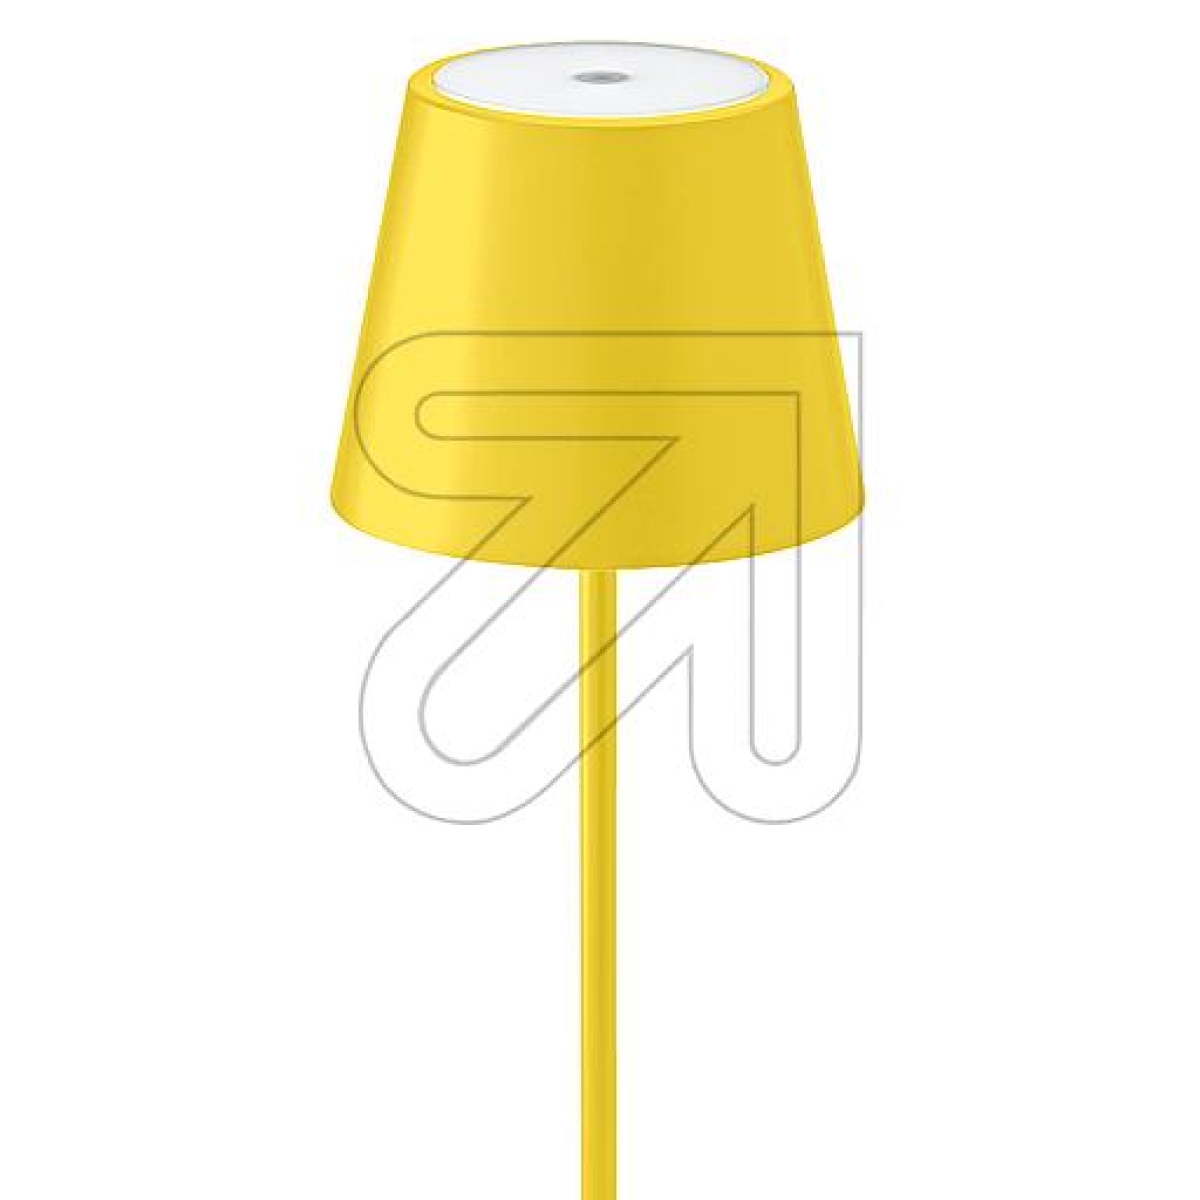 SIGORLED cordless floor lamp Nuindie yellow 4501801Article-No: 631880